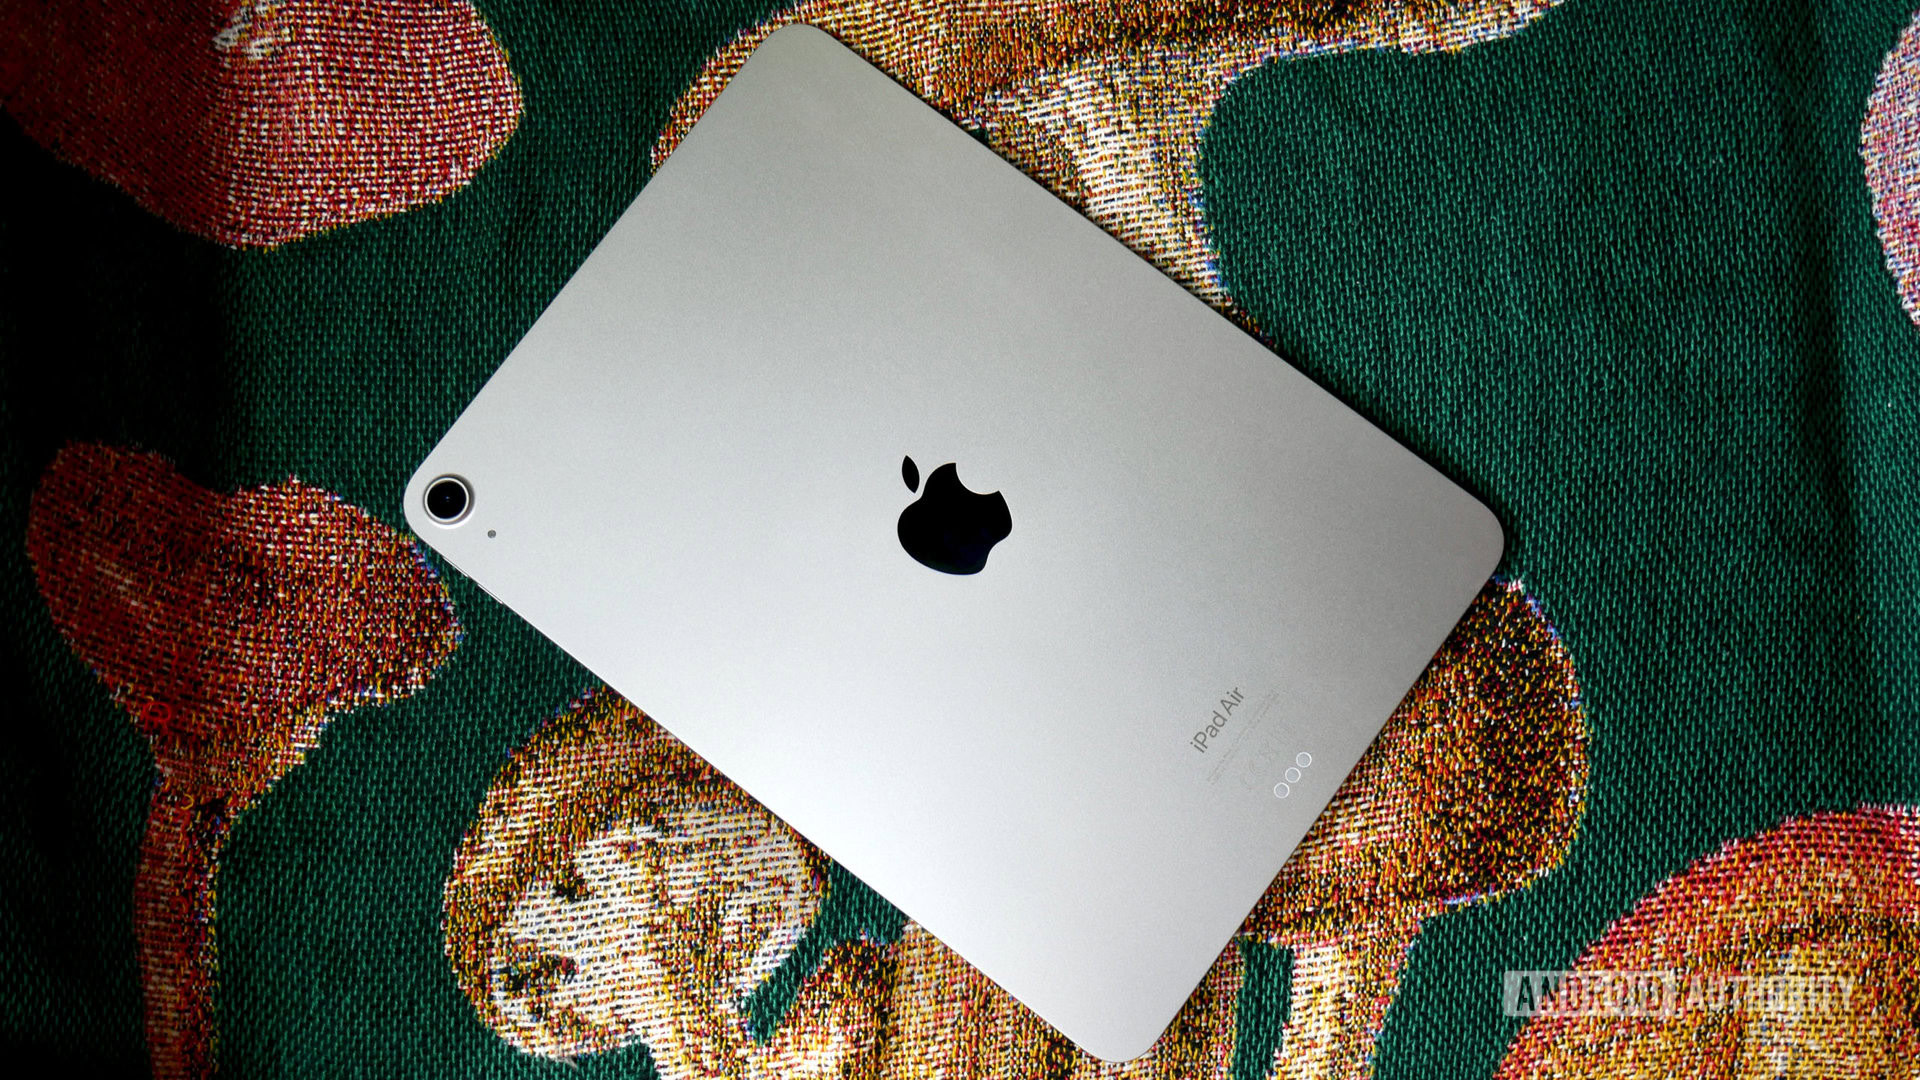 Apple iPad Air (5th generation) review: Mild upgrades, still uncontested